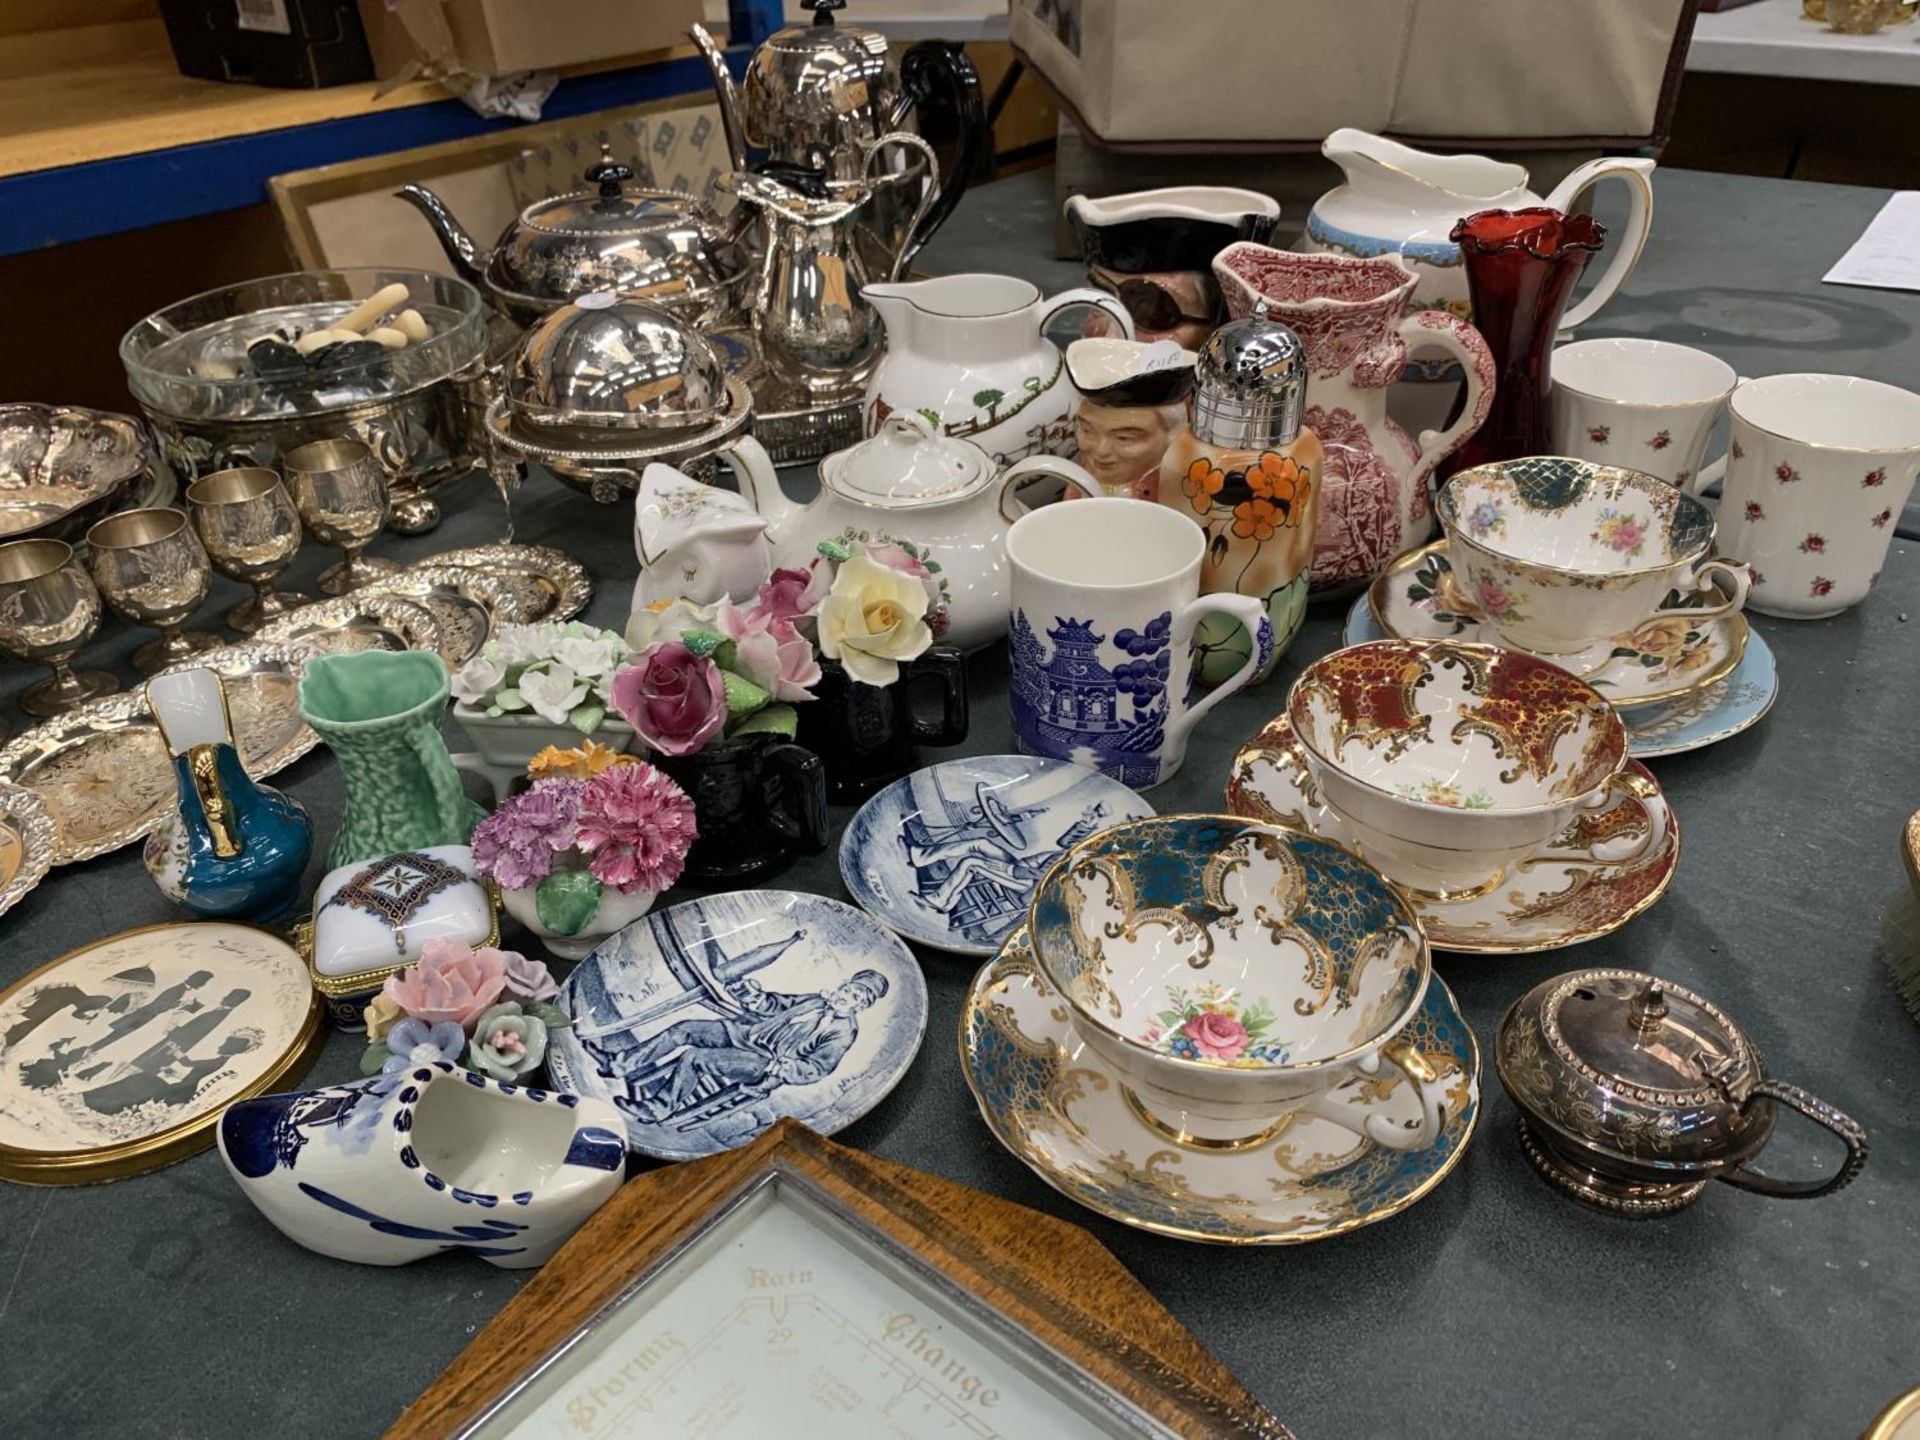 A LARGE QUANTITY OF CERAMIC AND CHINA TO INCLUDE PARAGON CUPS AND SAUCERS, FLORAL POSIES, CROWN - Image 6 of 8